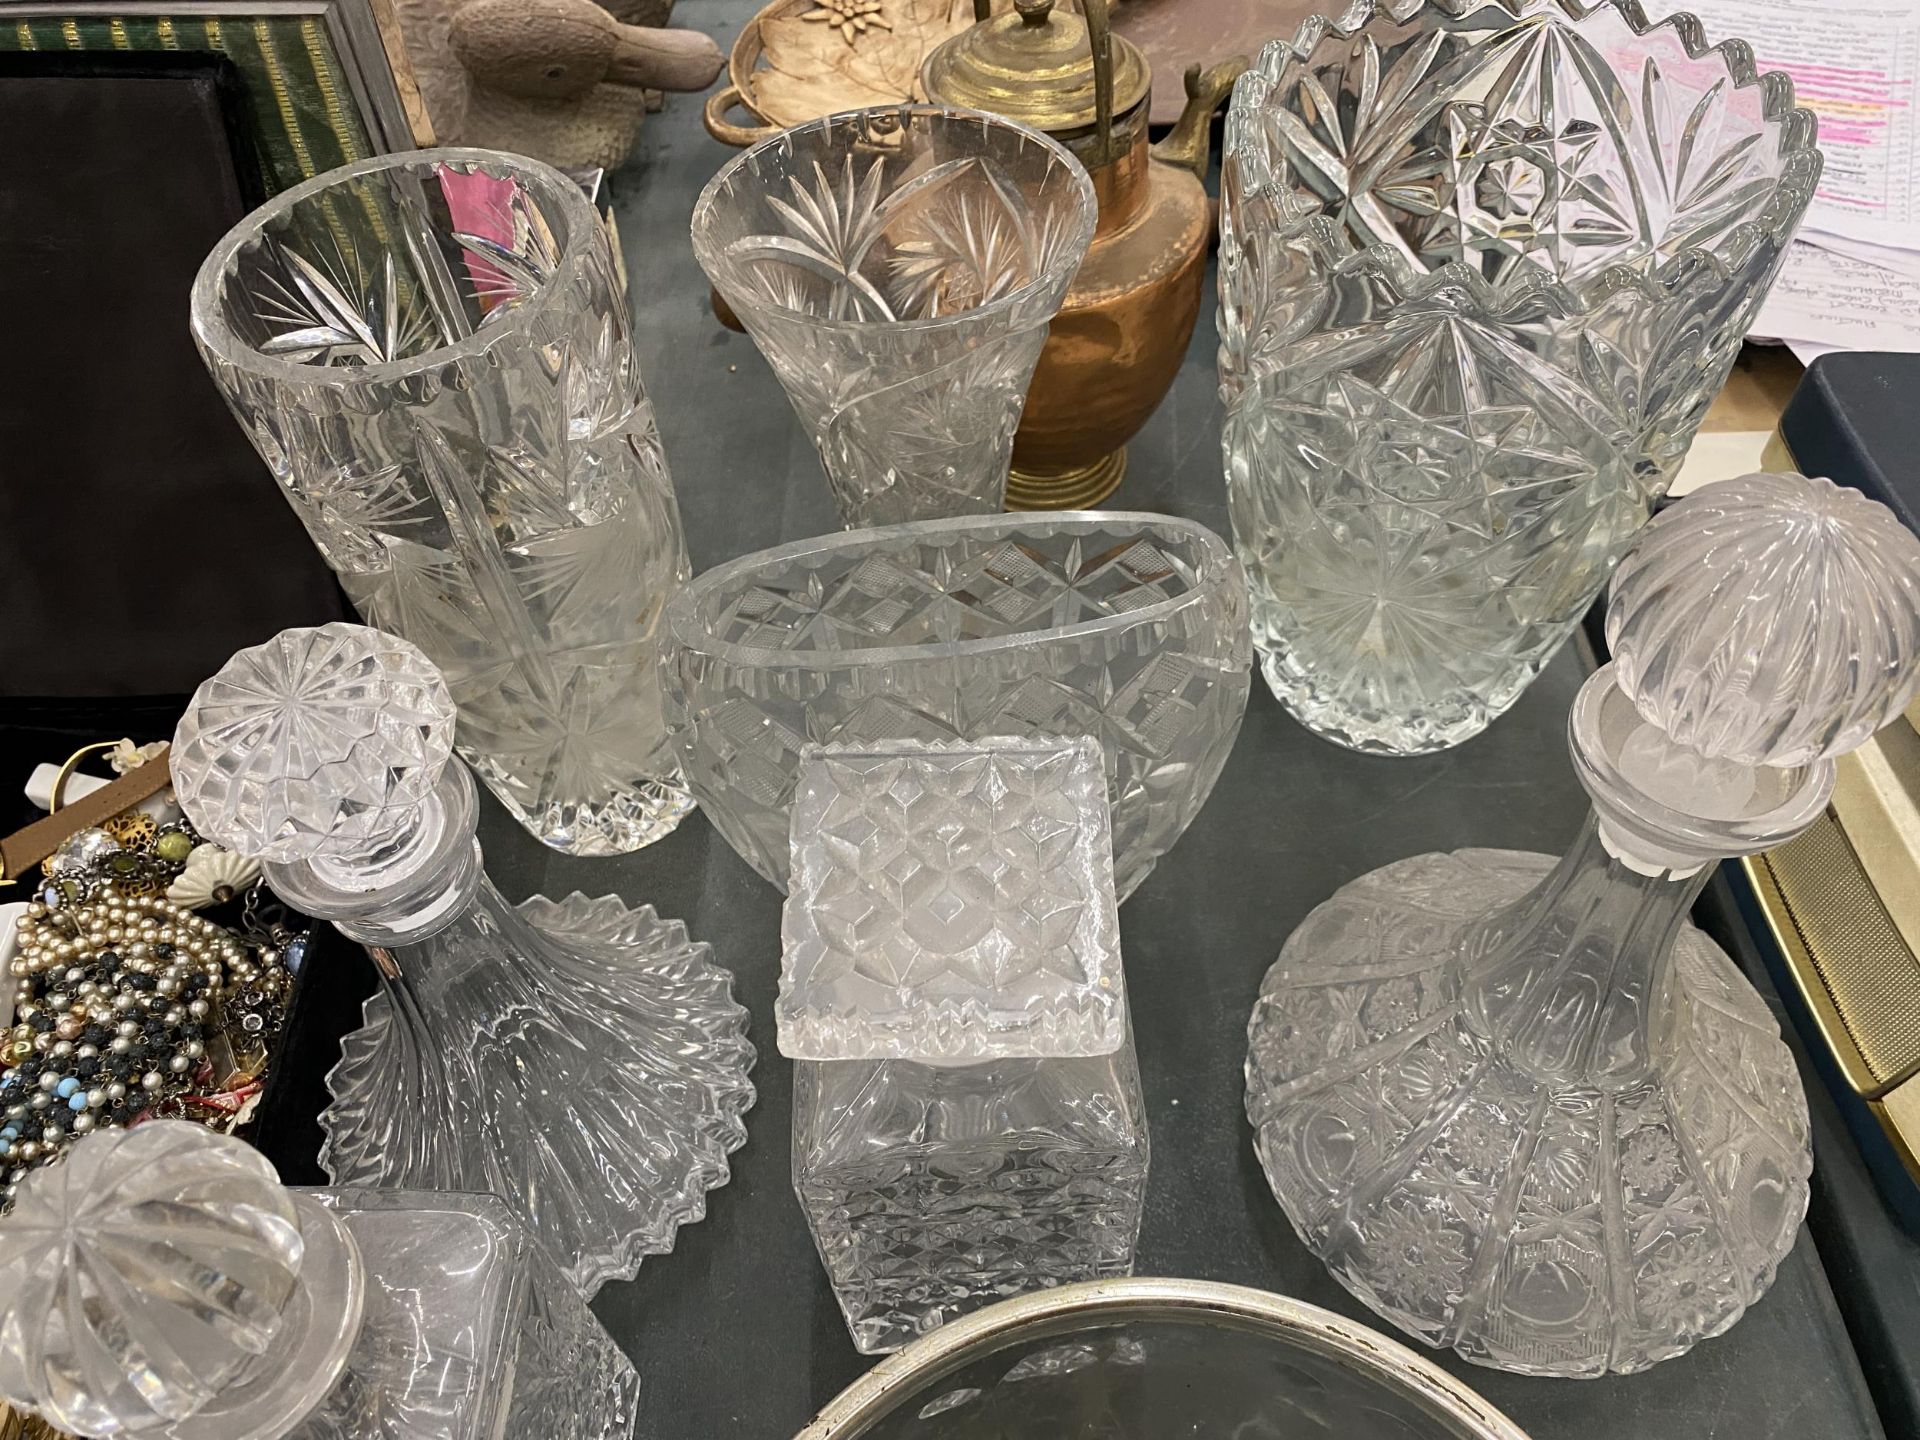 A LARGE QUANTITY OF GLASSWARE TO INCLUDE DECANTERS, VASES, BOWLS, ETC - 21 PIECES IN TOTAL - Bild 4 aus 4